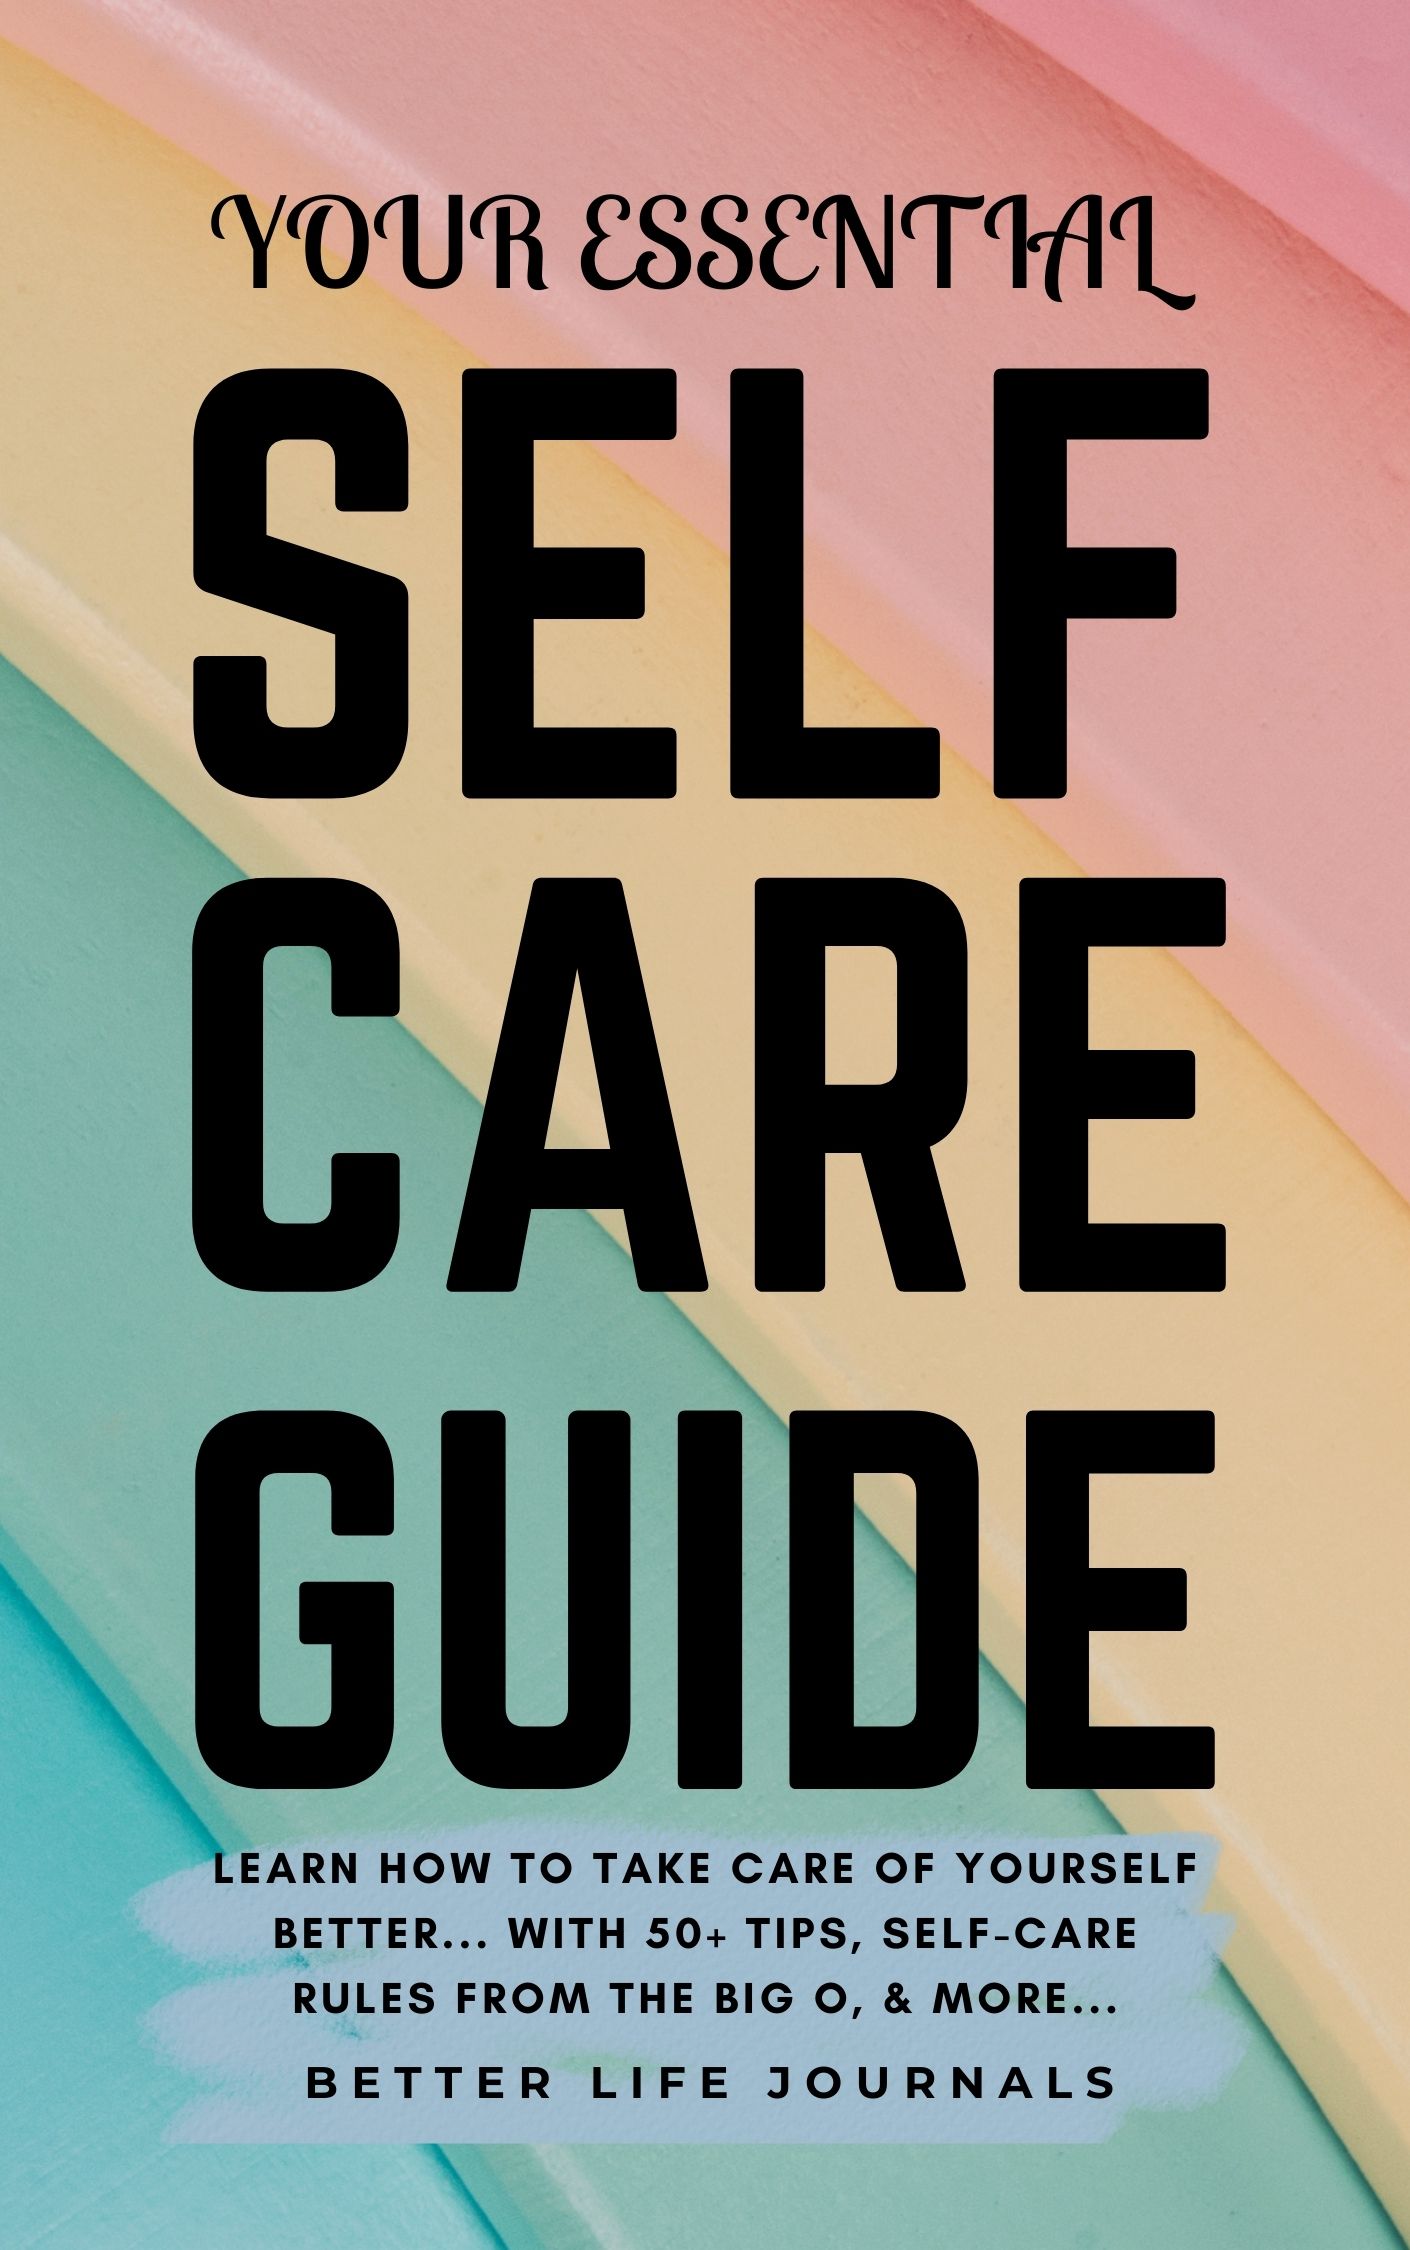 FREE: Your Essential Self Care Guide: Learn How To Take Care of Yourself Better, With 50+ Tips & Activities, Self-Love Rules From the Big O, Action Plan, And Much More… by Better Life Journals